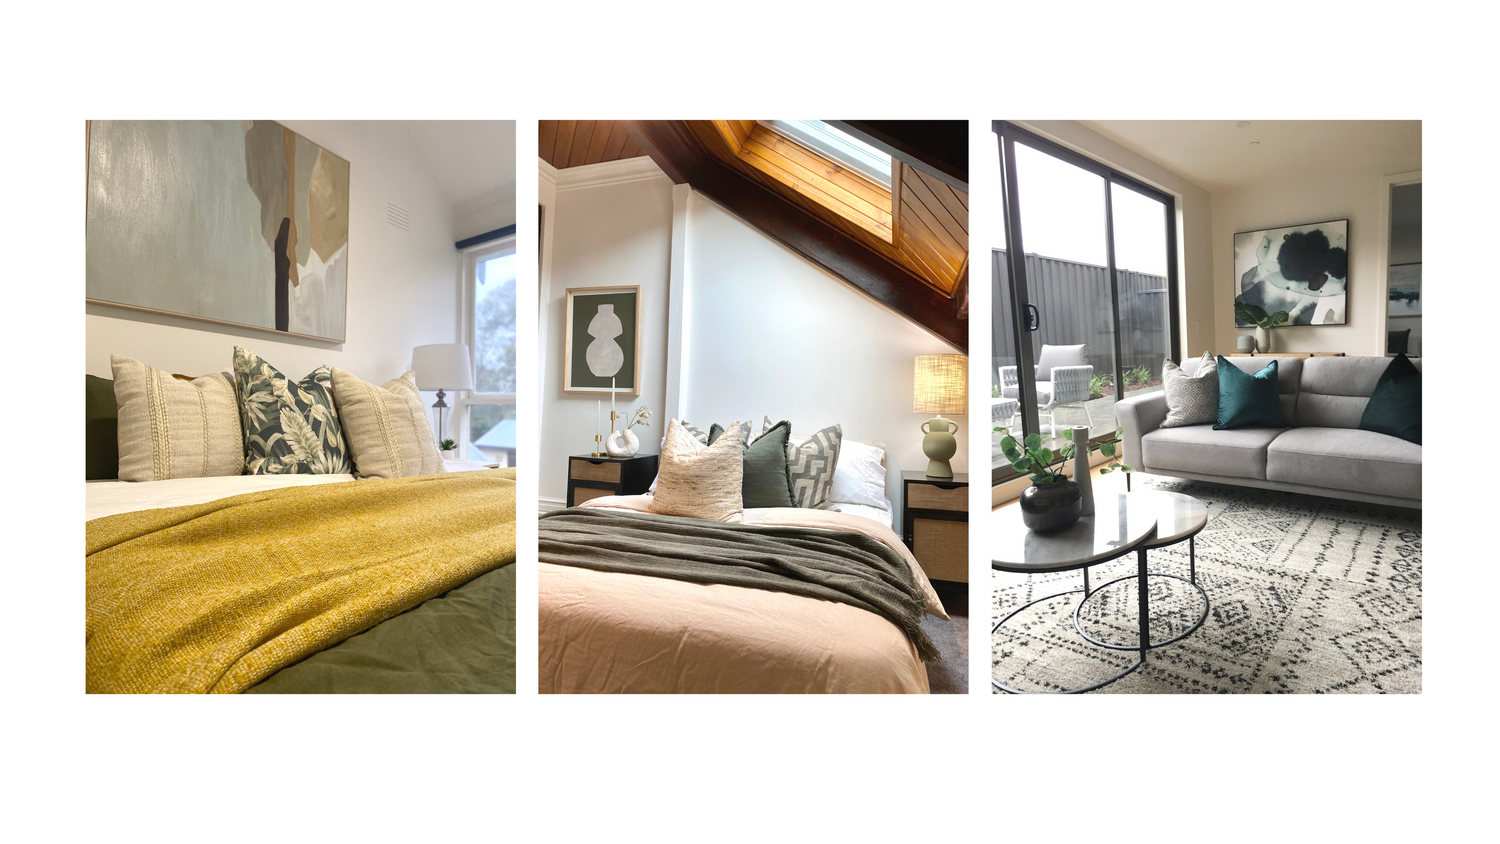 Home By Déjà Vu will provide a tailored quote including all delivery, styling and removal after six-week period. When selling your property, you want nothing more than potential buyers to fall in love with it immediately.